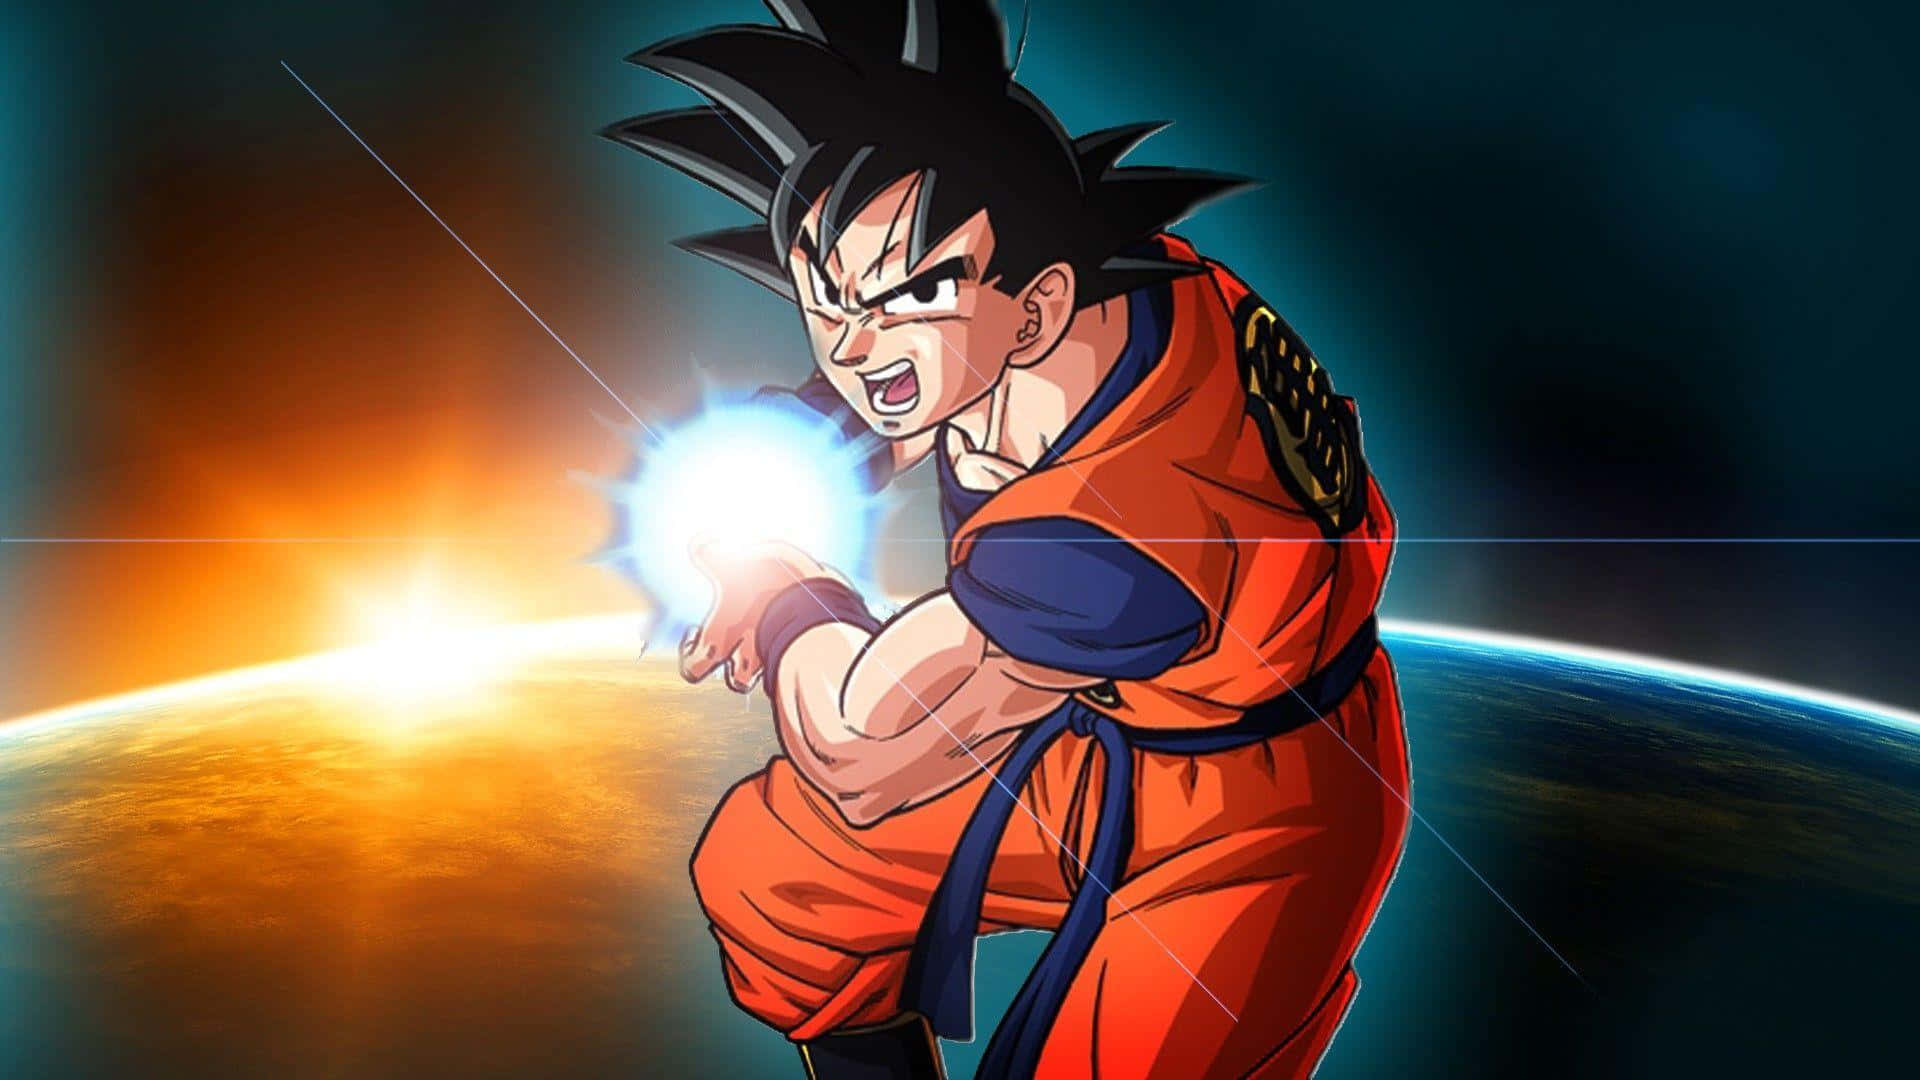 Get an Out of This World Experience with Dragon Ball Z Trunks Wallpaper